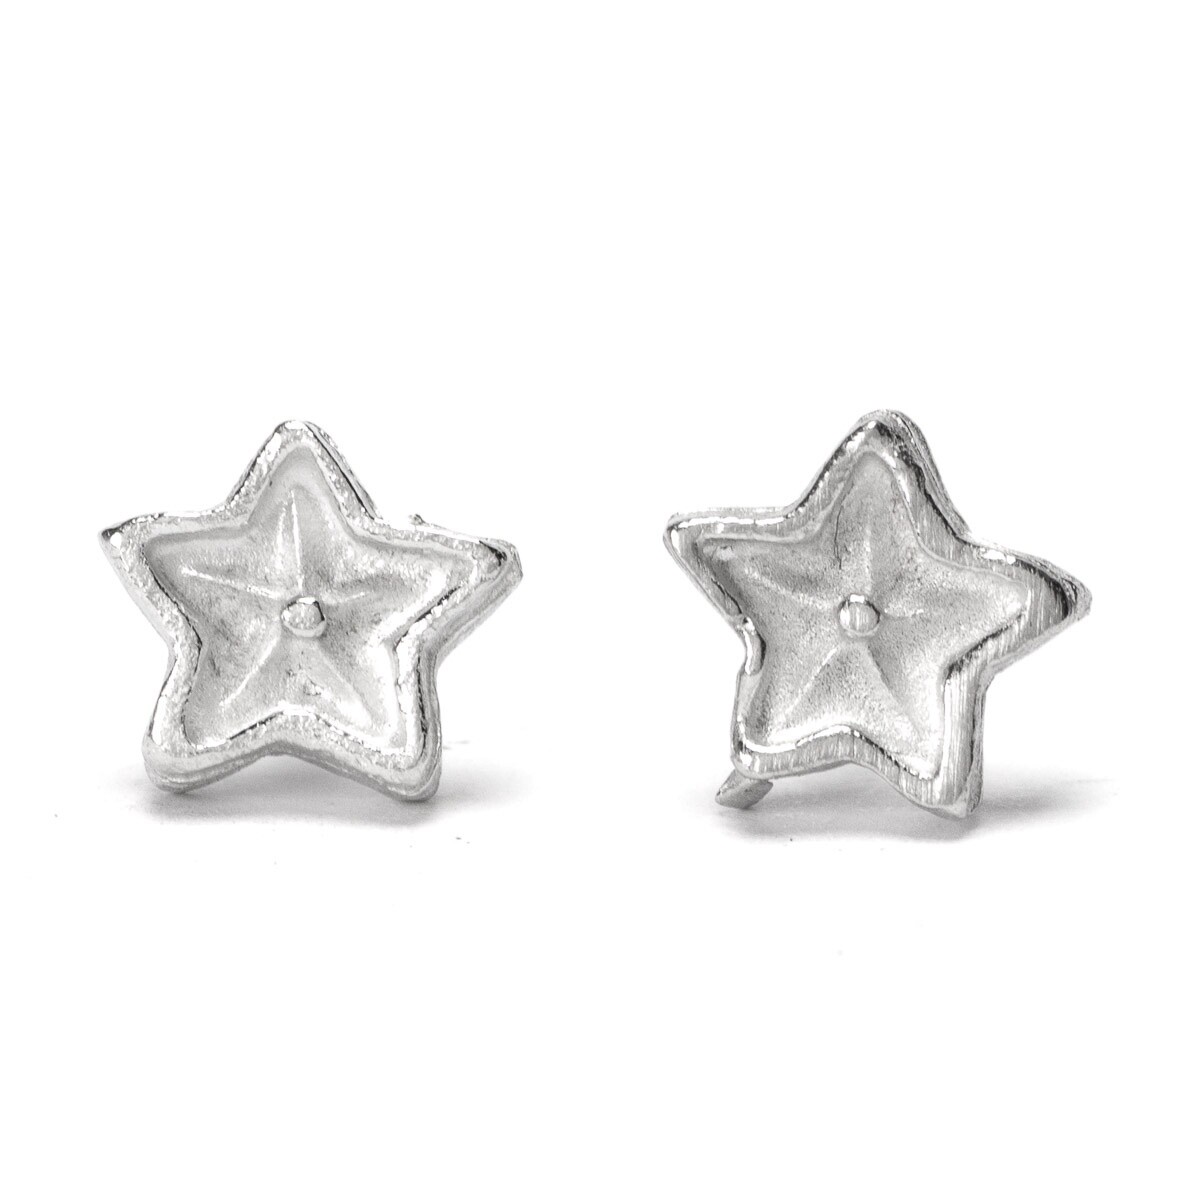 Star Within a Star Pewter Stud Earrings by Metal Planet